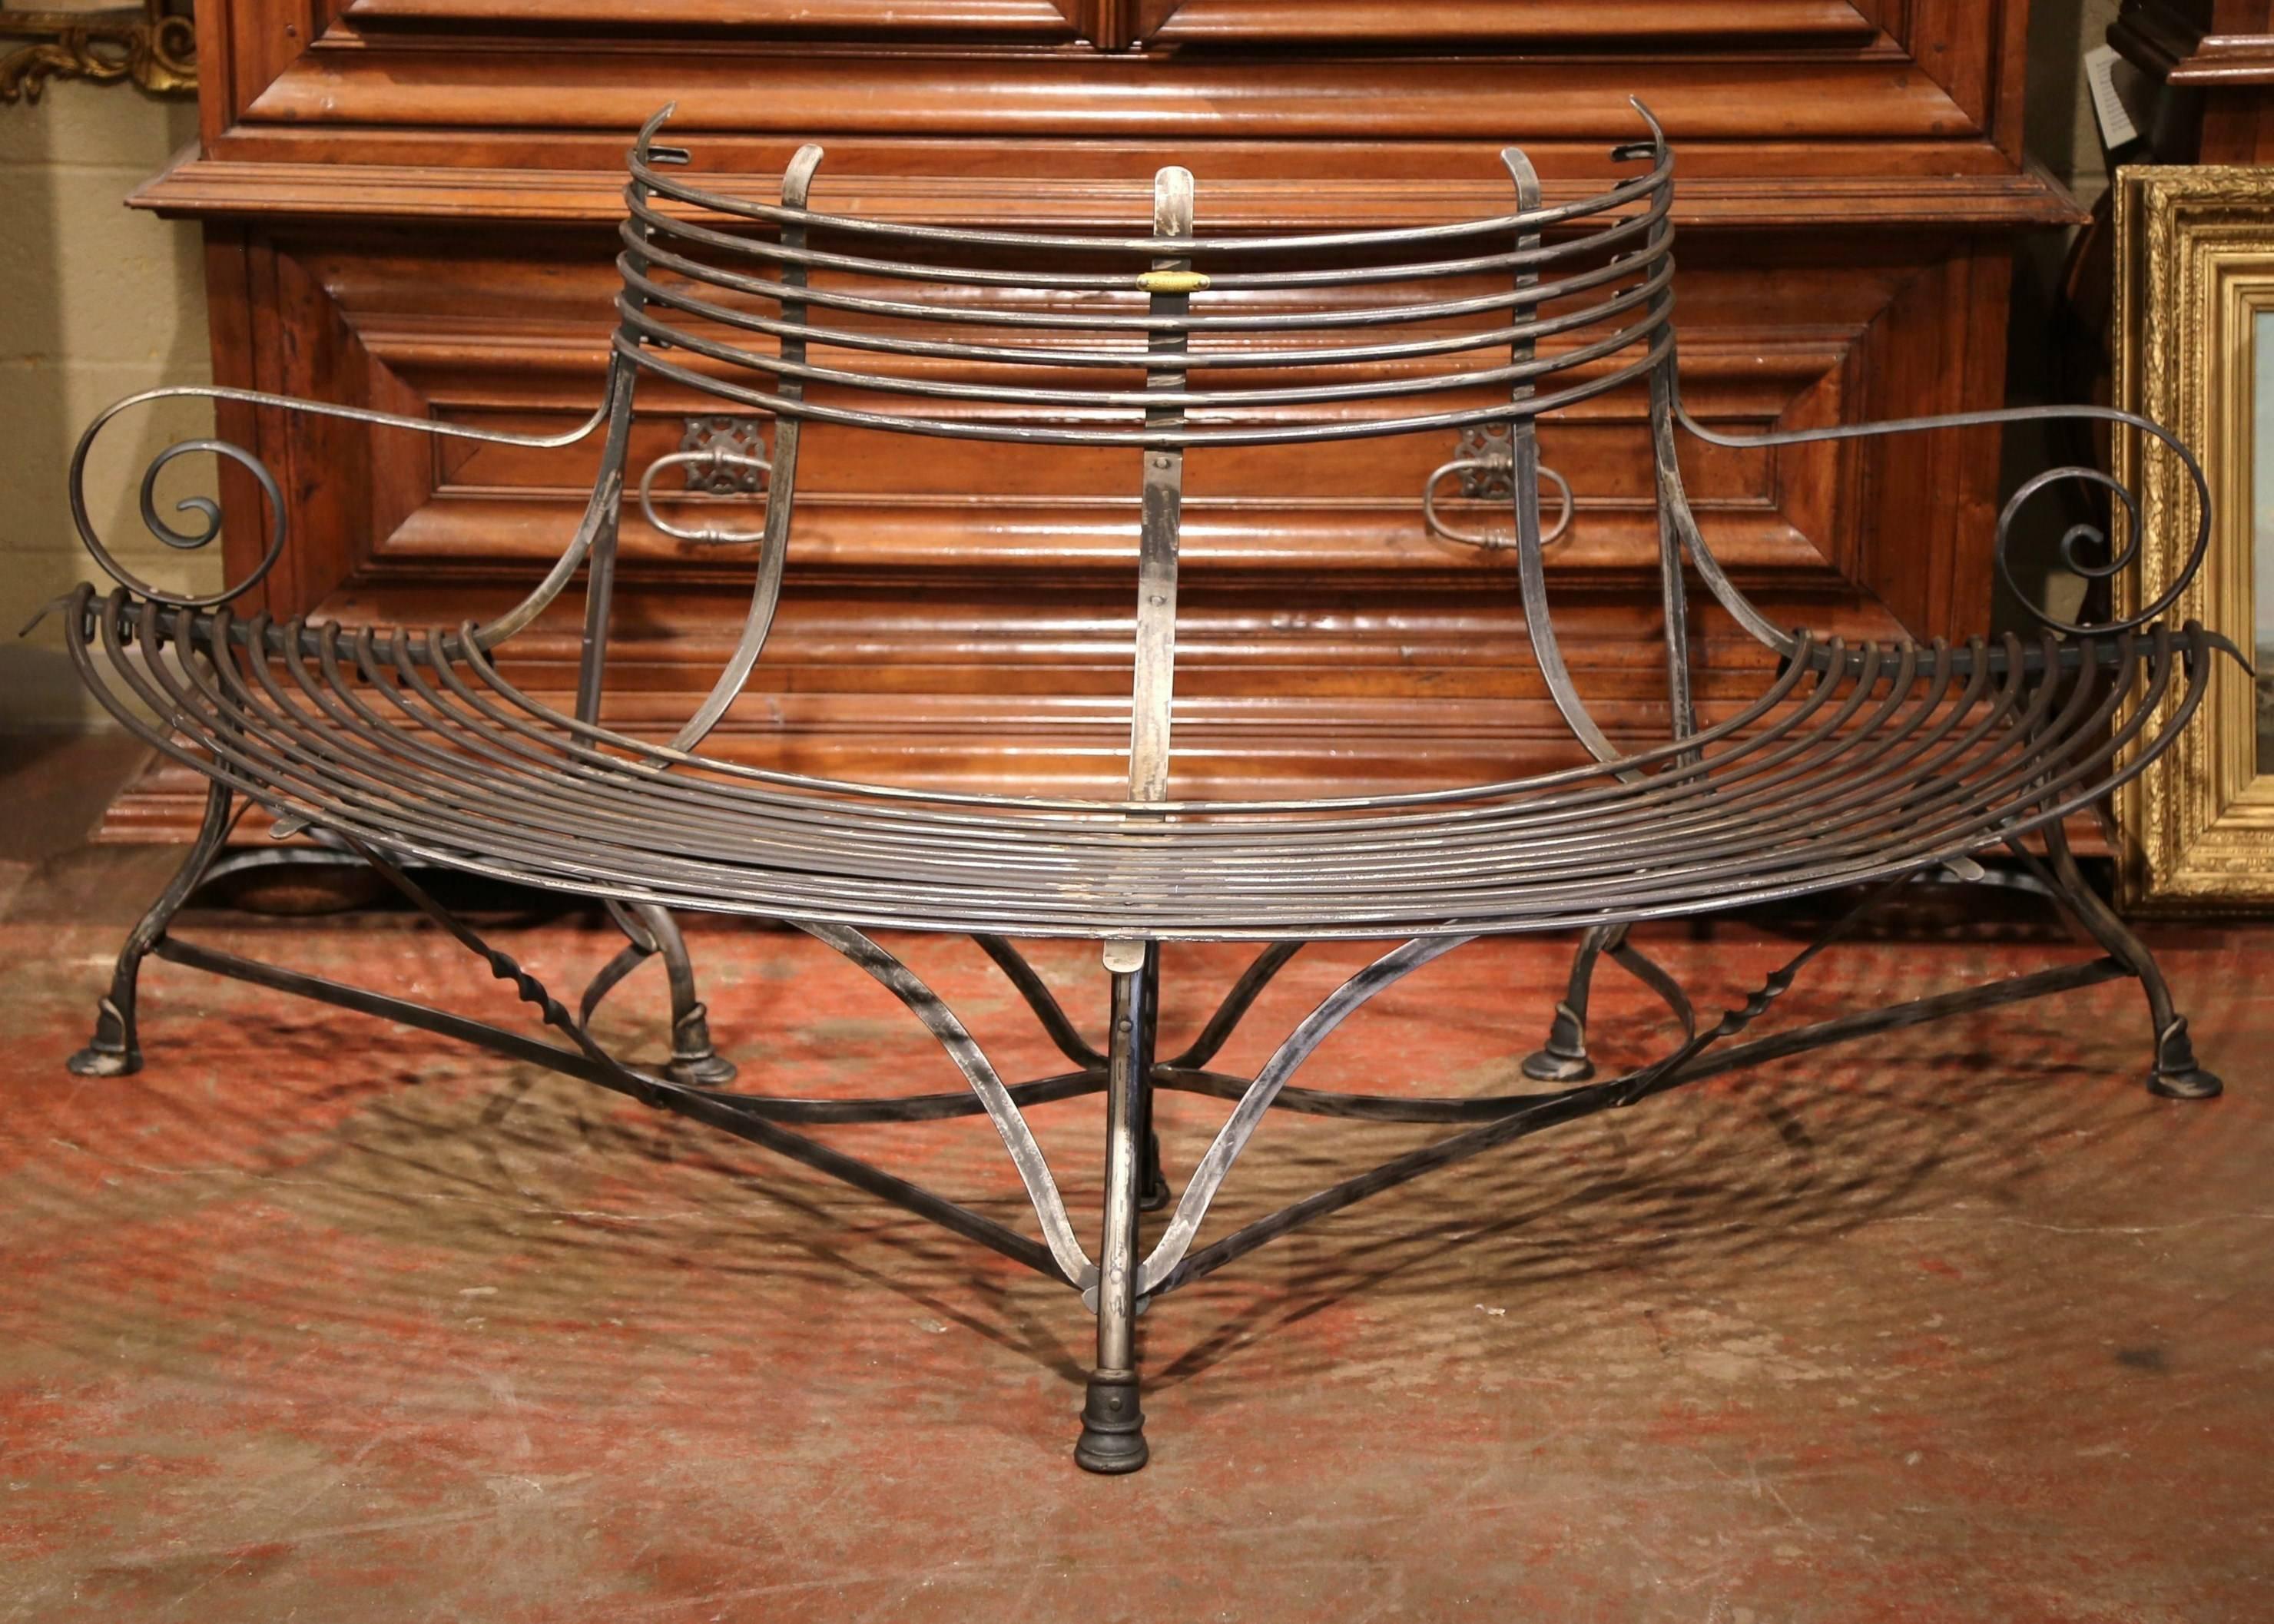 Contemporary French Polished Iron Curved Around the Tree Shaped Garden Bench